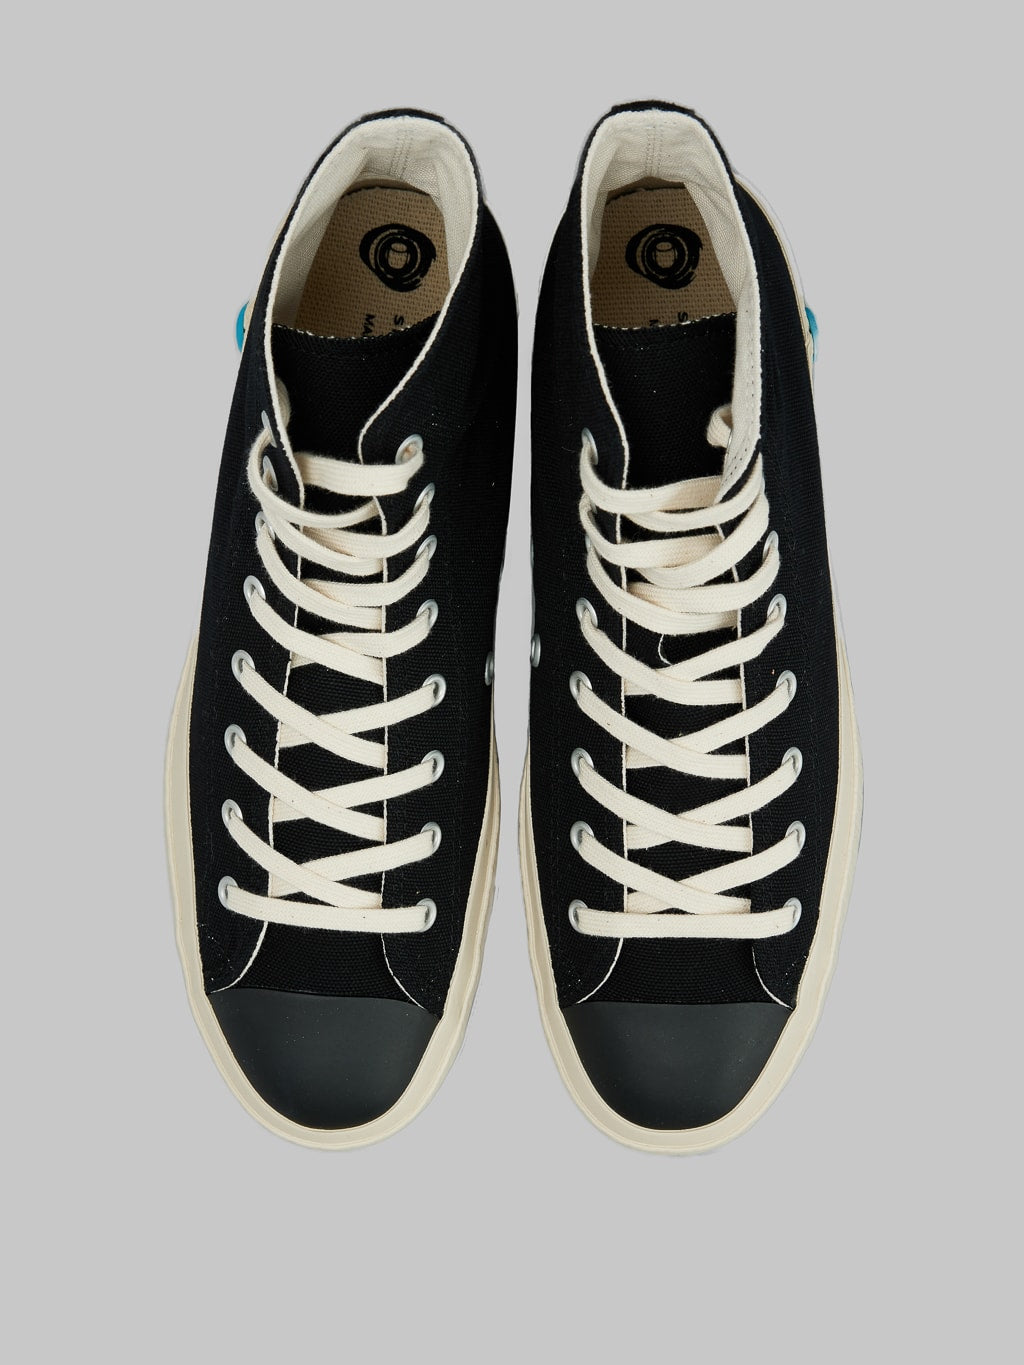 Shoes like pottery high sneaker black up view